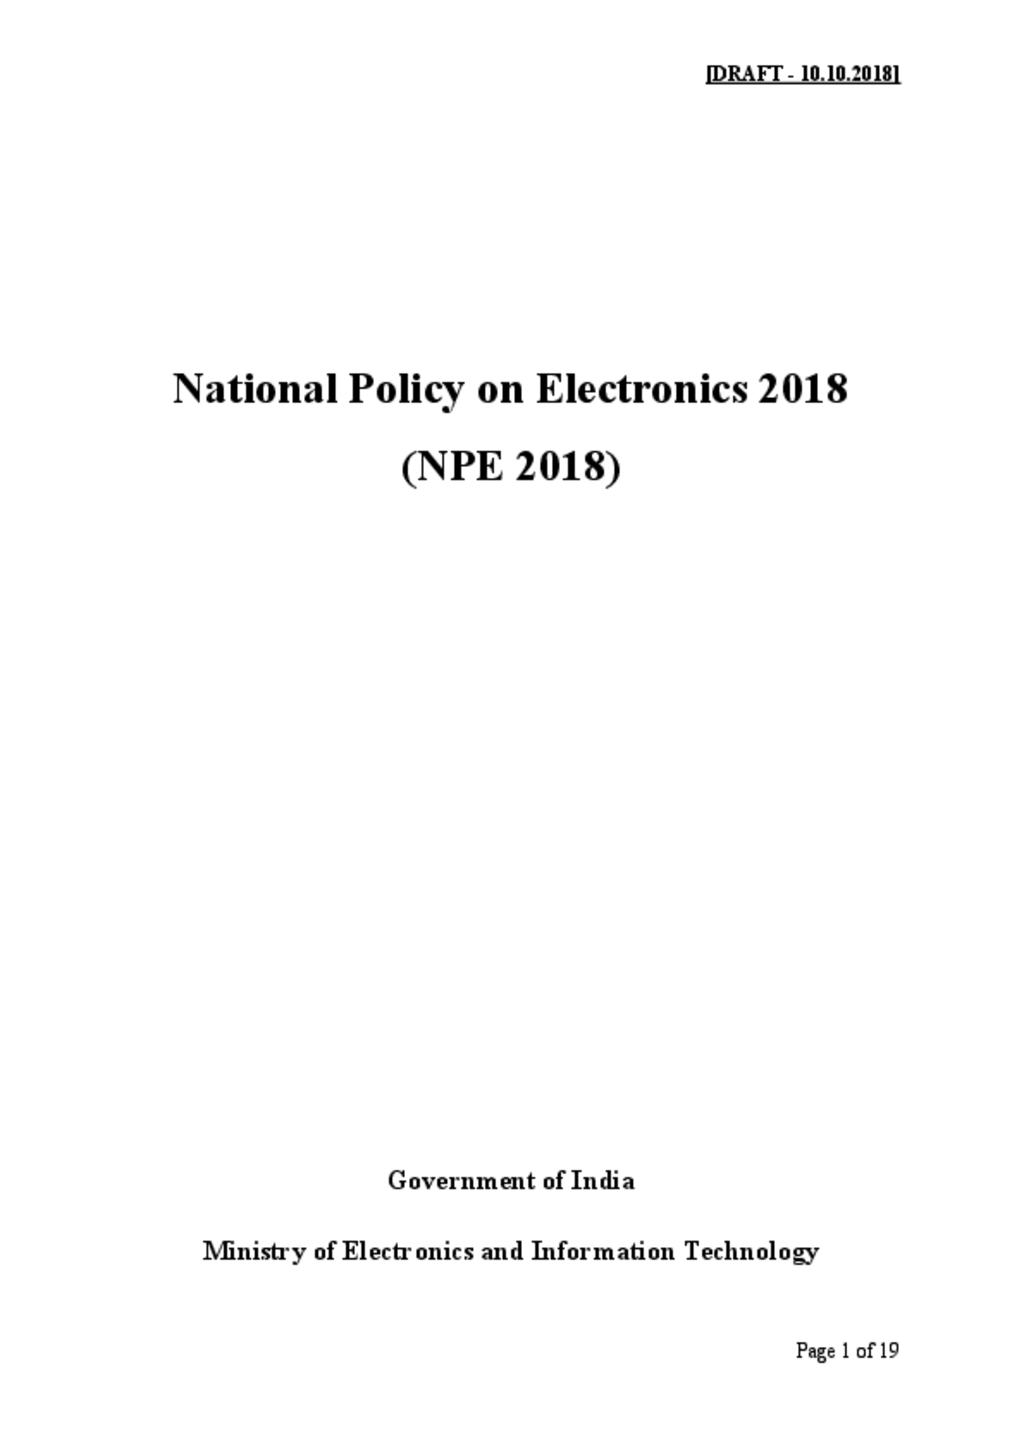 Draft Electronics Policy